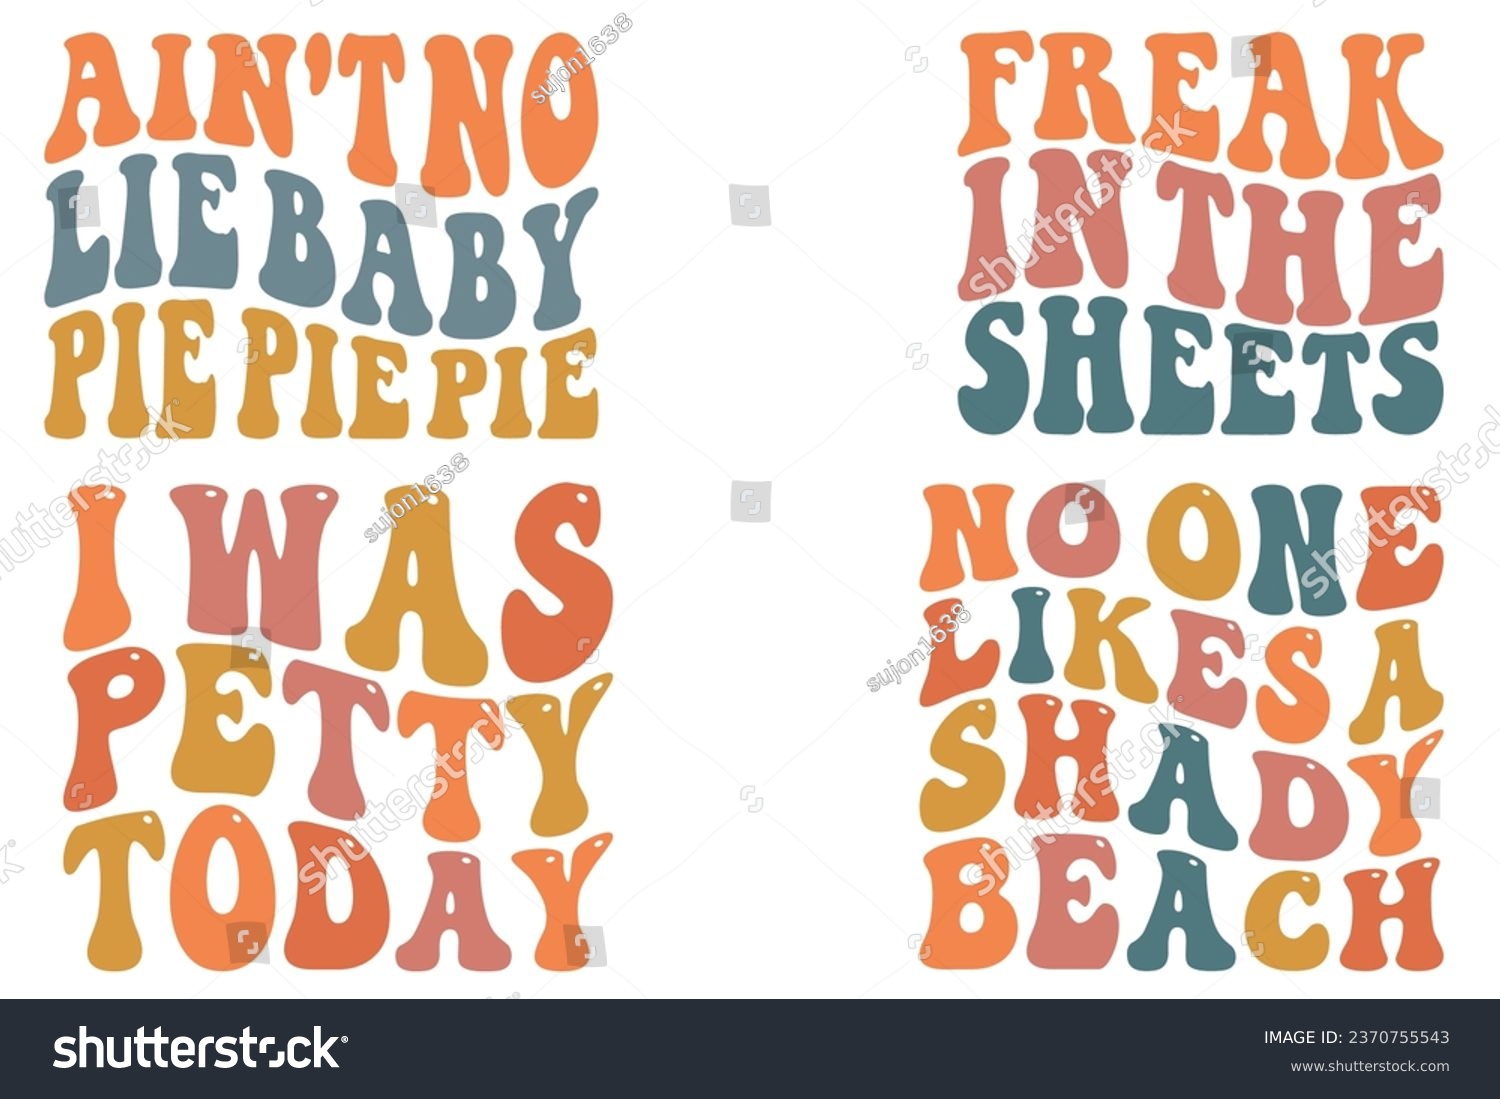 SVG of Ain't No Lie Baby Pie Pie Pie, Freak In The Sheets, I Was Petty Today, No One Likes A Shady Beach retro wavy T-shirt svg